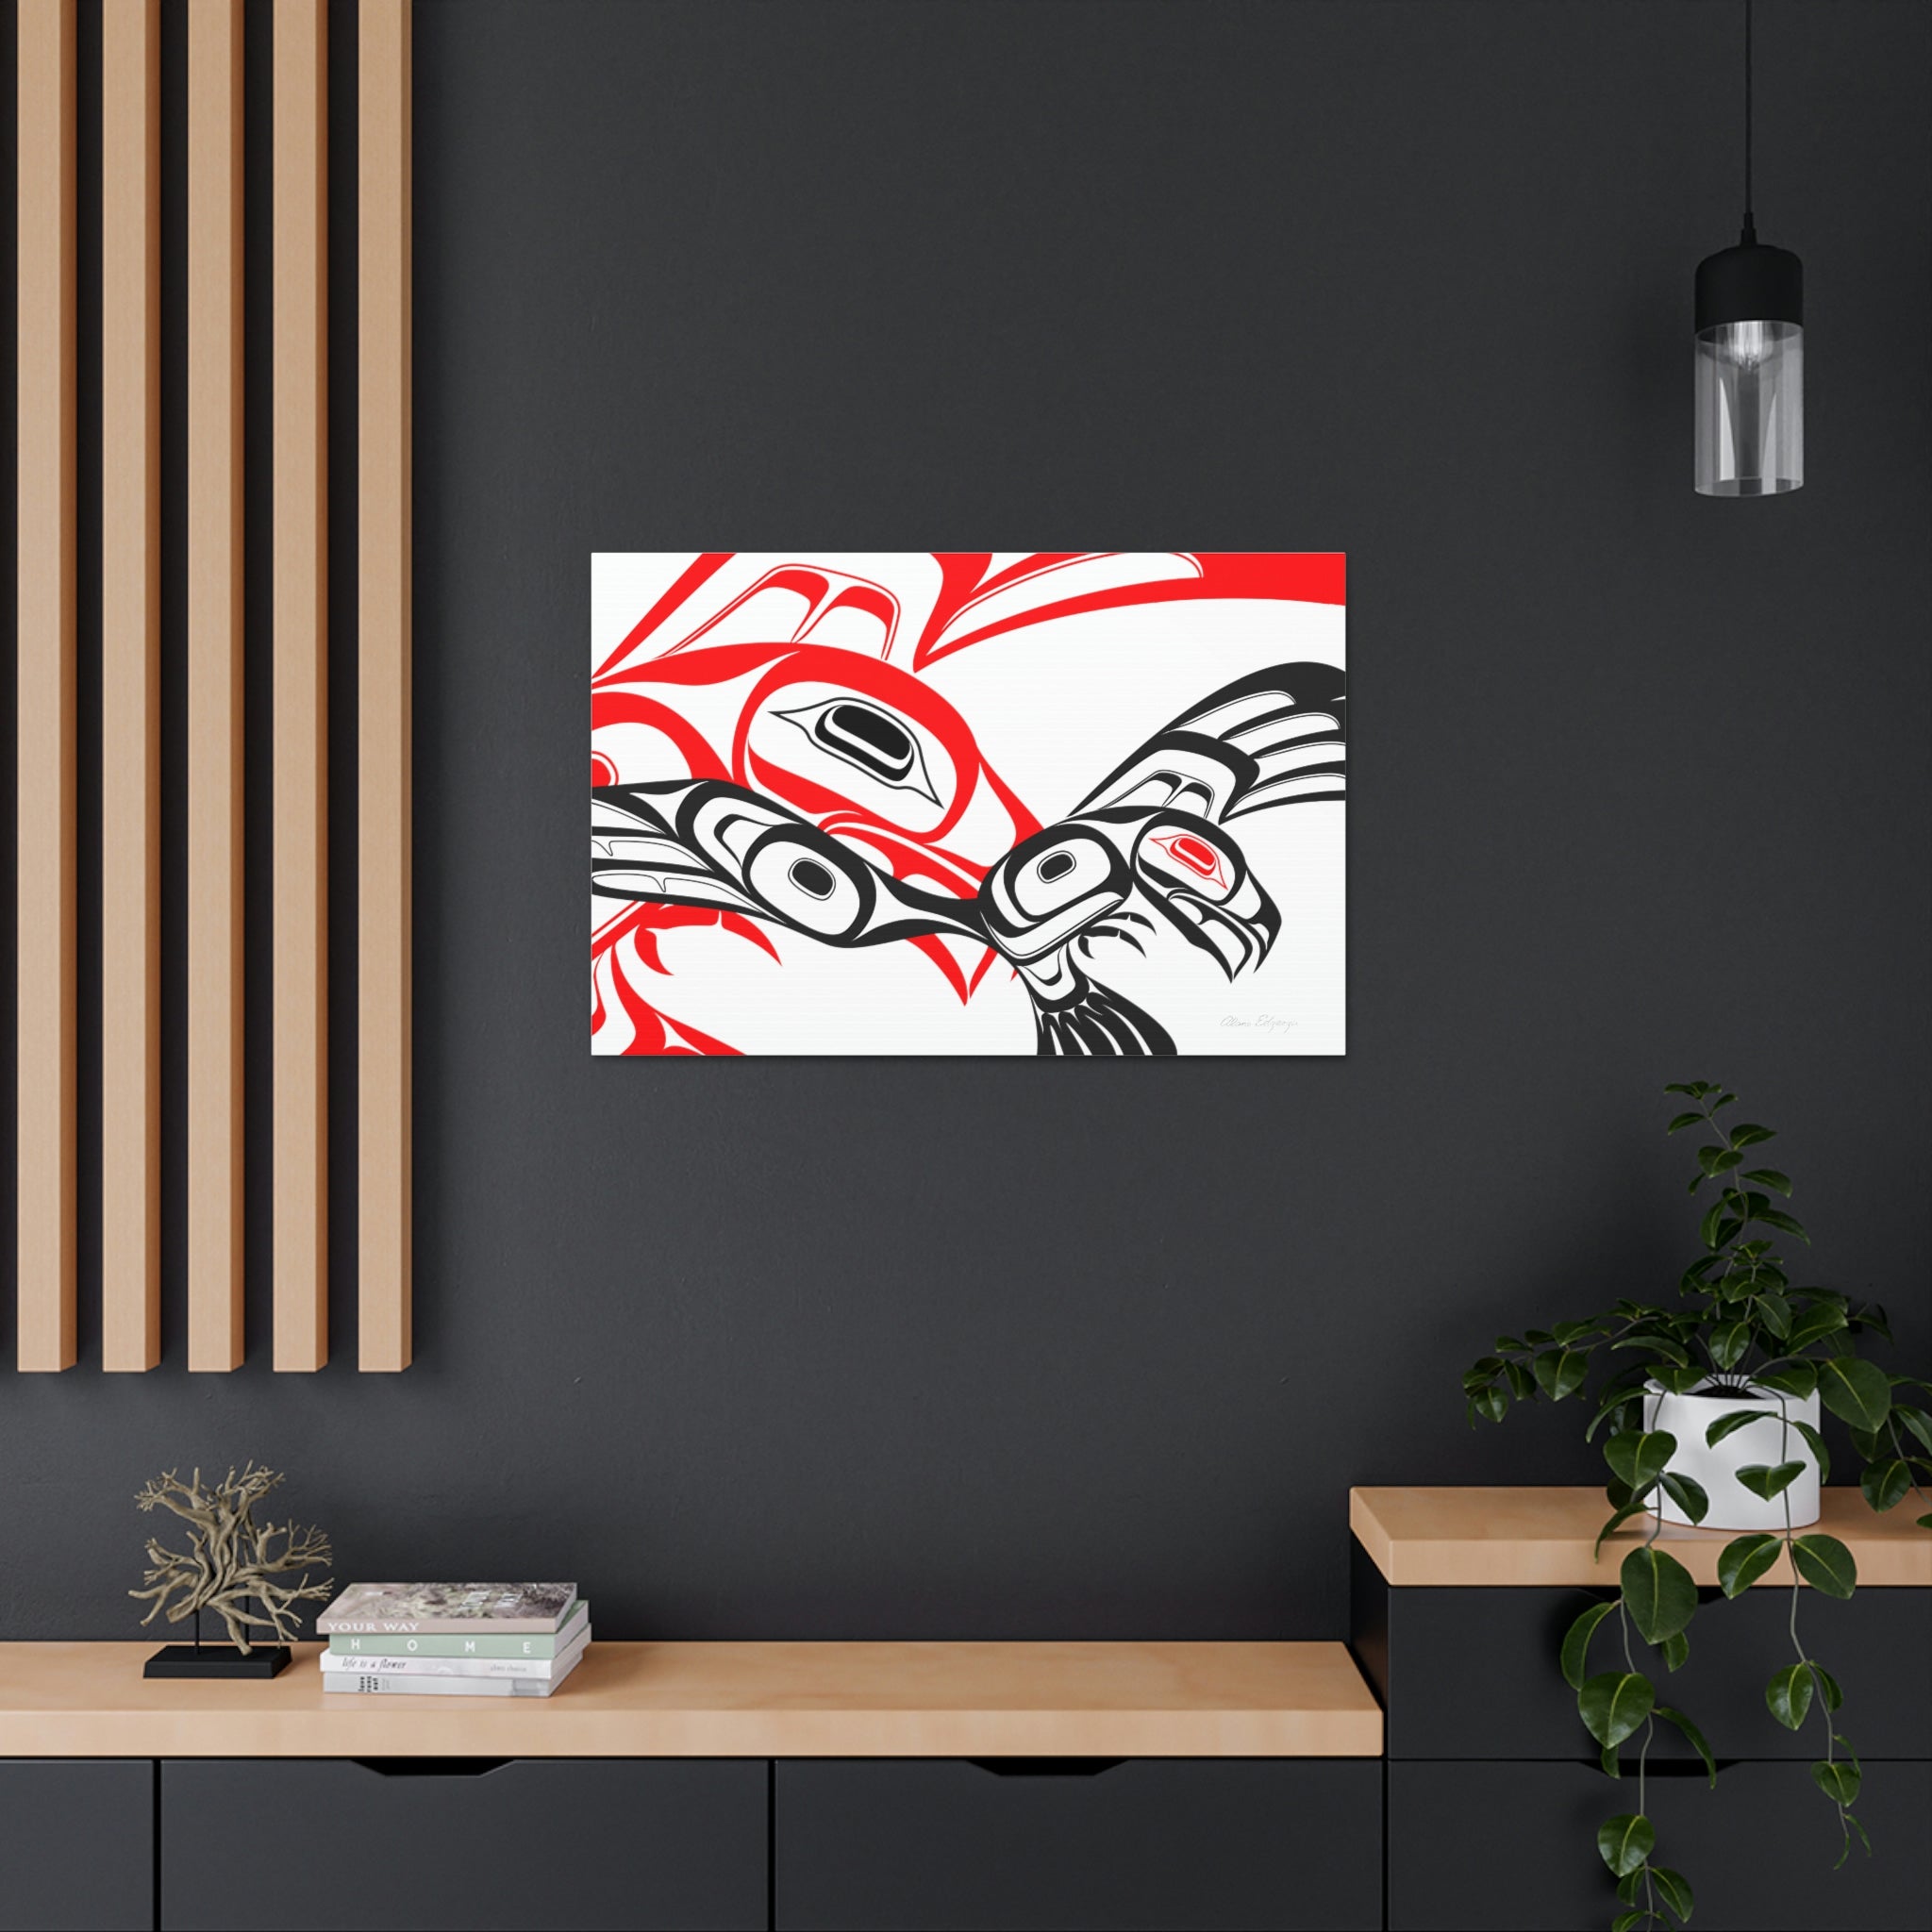 Red and Black Eagle Striking on Canvas 2023